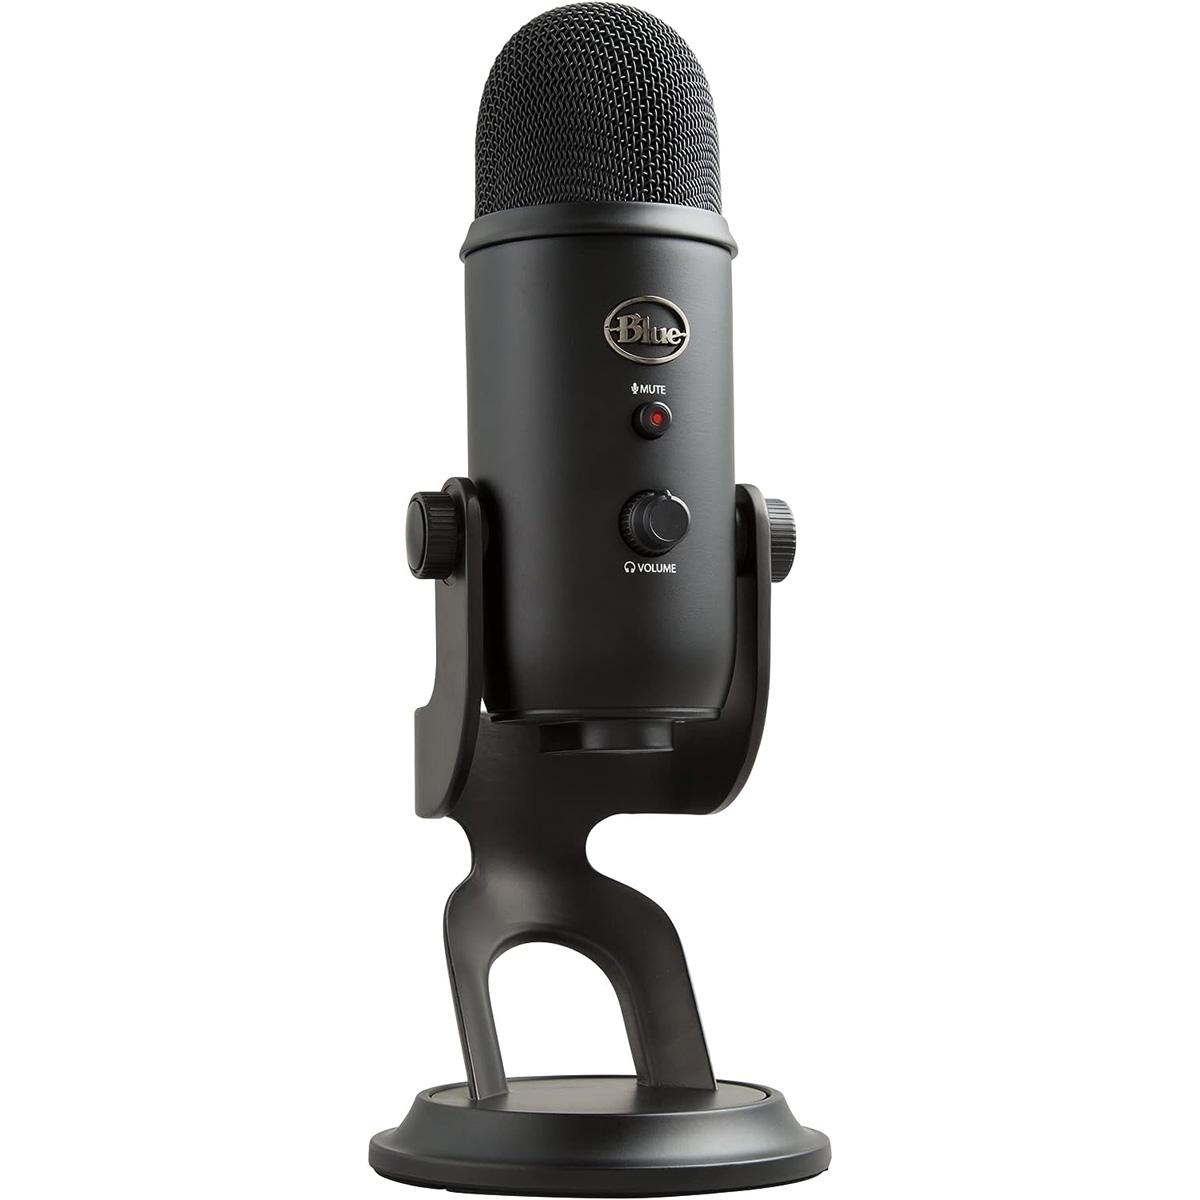 Blue Yeti USB Microphone for PC or Mac Refurbished for $59.99